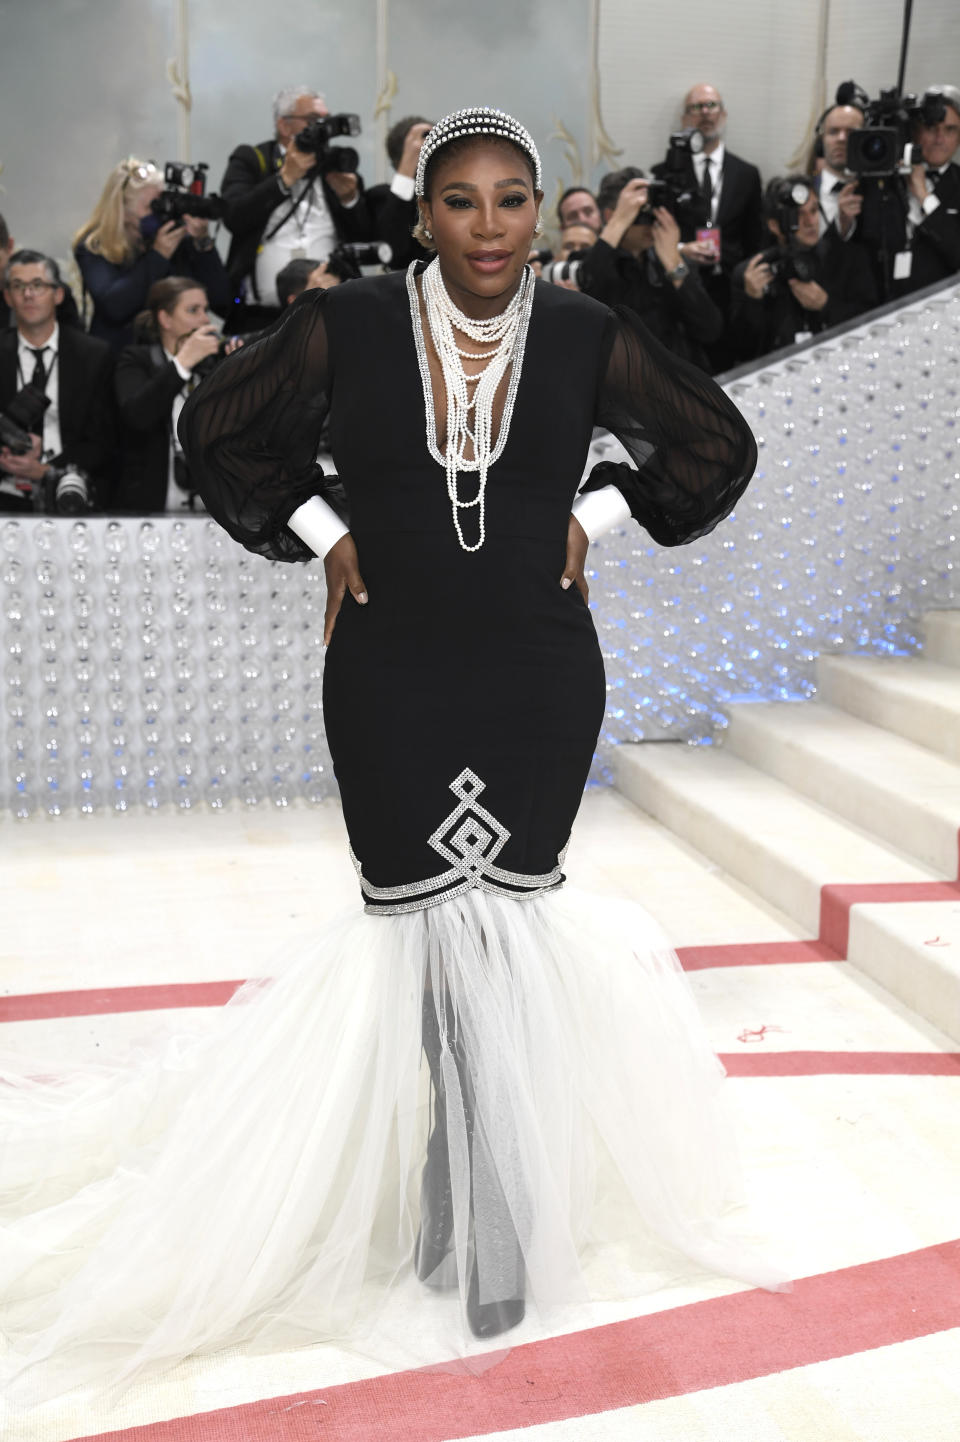 Serena Williams attends The Metropolitan Museum of Art's Costume Institute benefit gala celebrating the opening of the "Karl Lagerfeld: A Line of Beauty" exhibition on Monday, May 1, 2023, in New York. (Photo by Evan Agostini/Invision/AP)